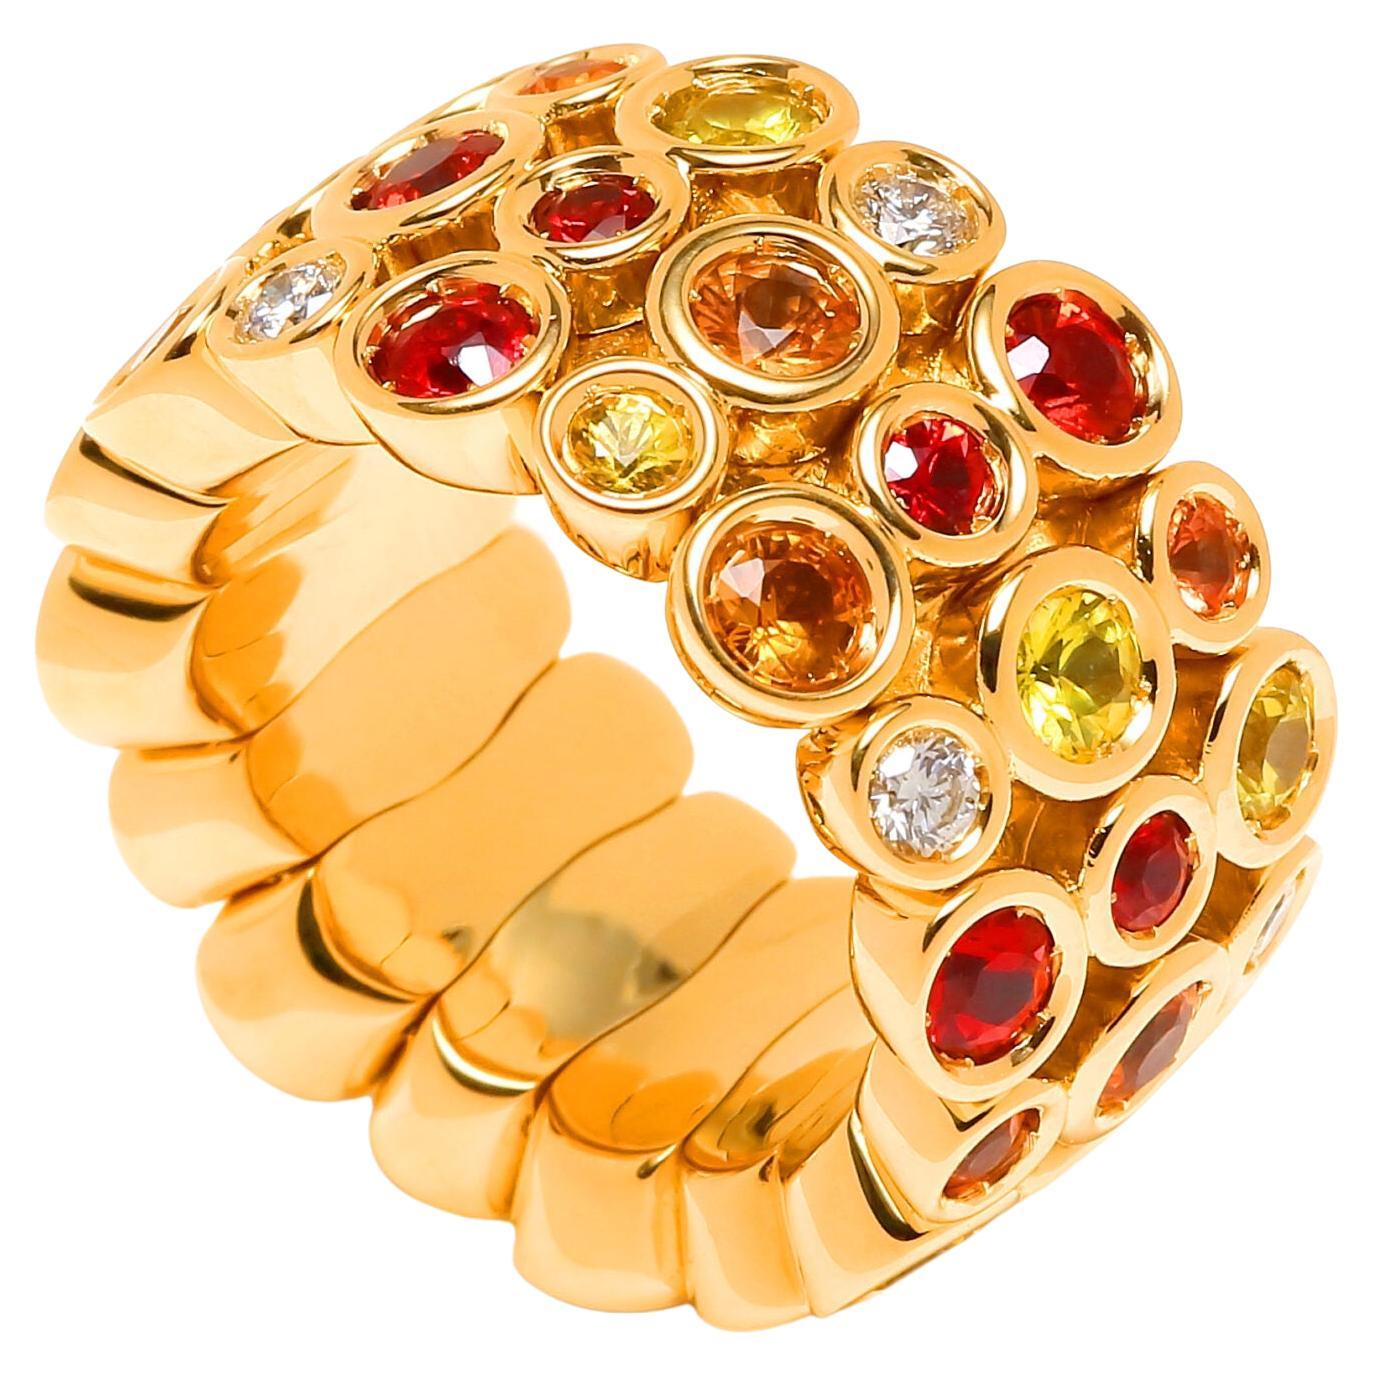 Modern Round Sapphires, Rubies & Diamonds Ring Set in 18K Yellow Gold For Sale